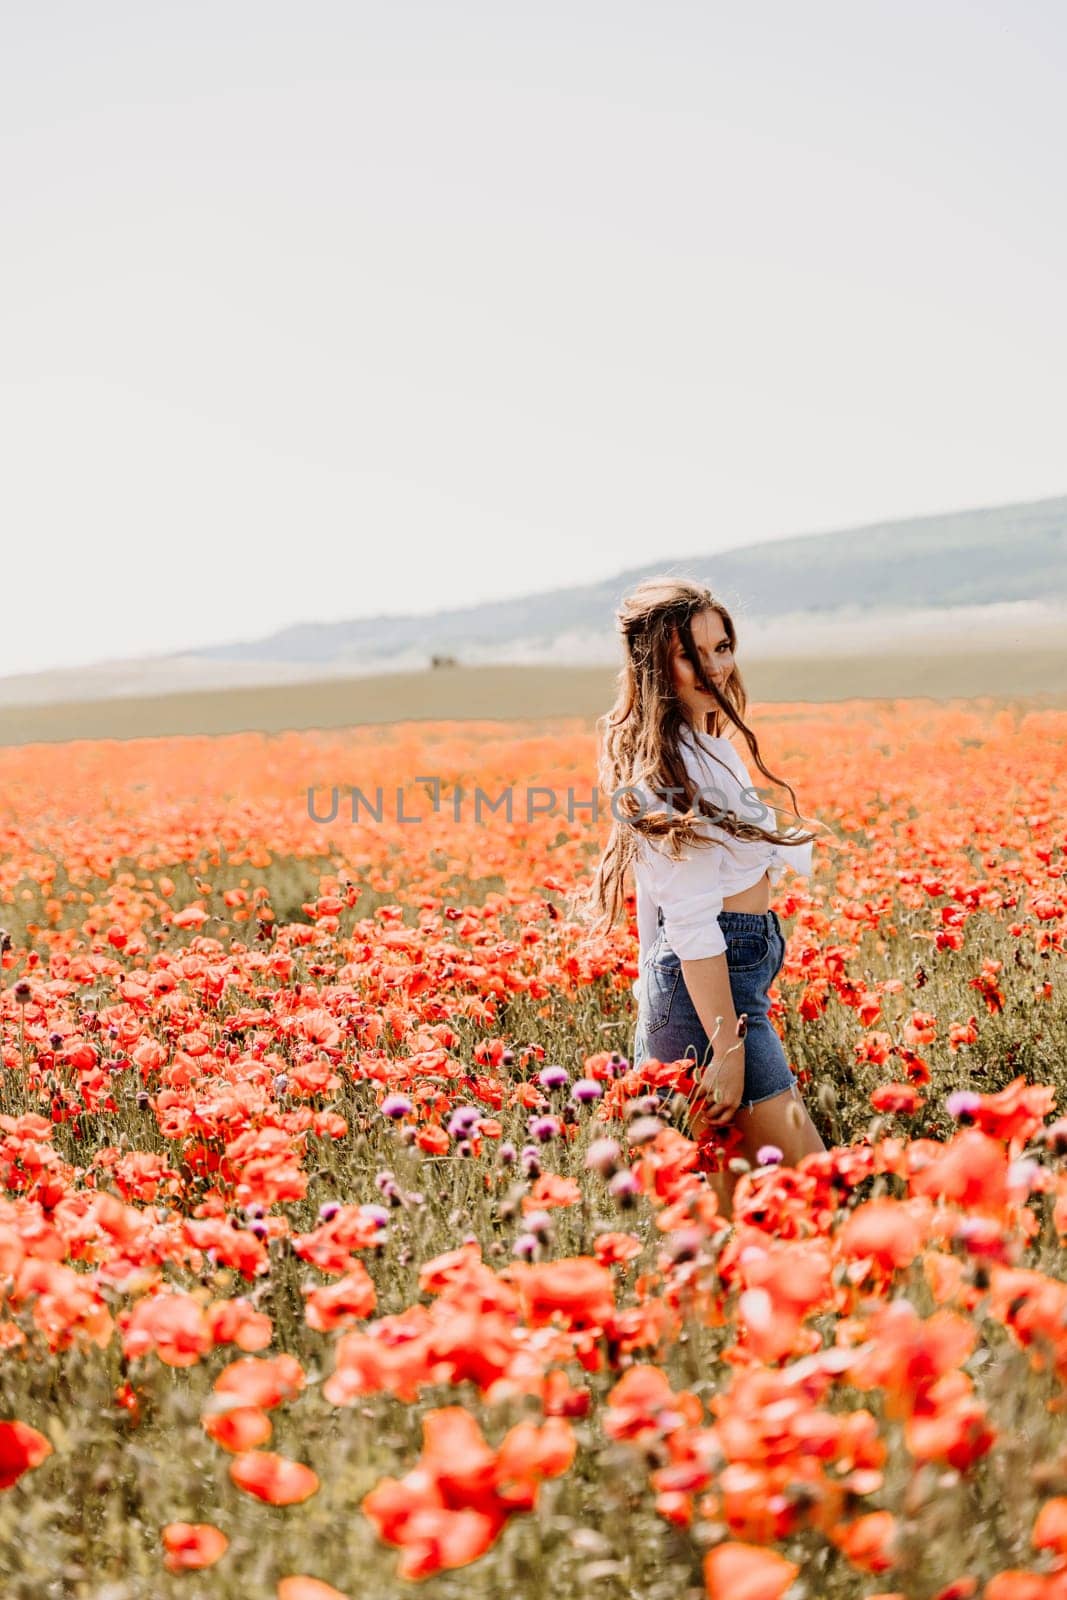 Happy woman in a poppy field in a white shirt and denim skirt with a wreath of poppies on her head posing and enjoying the poppy field